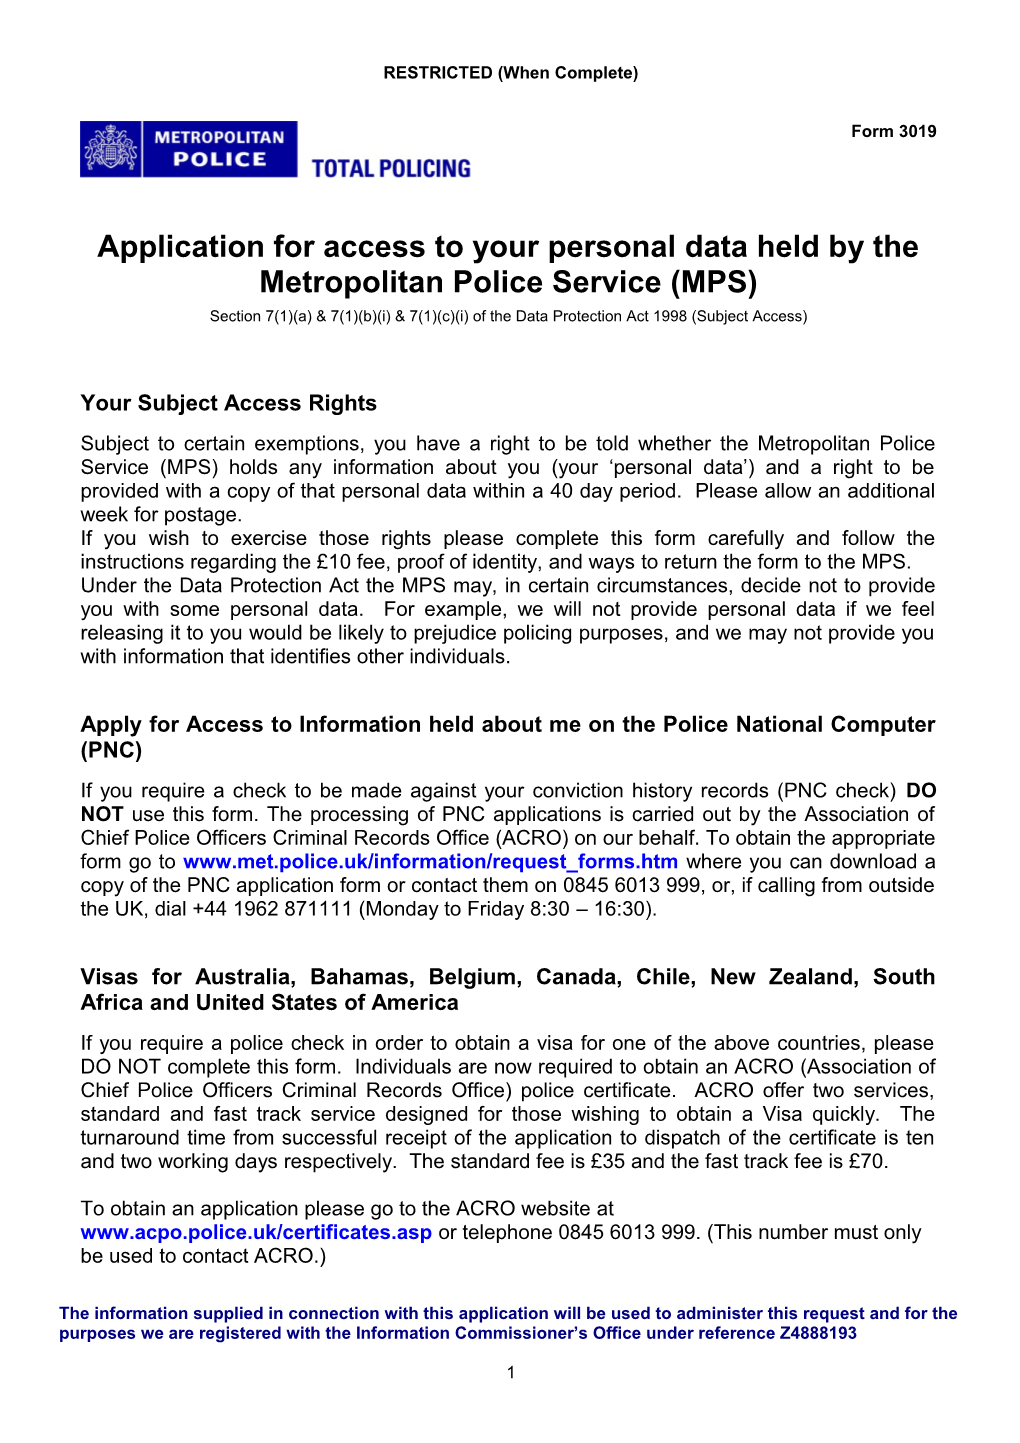 Form 3019 - Application for Access to Your Personal Data Held by the Metropolitan Police Service